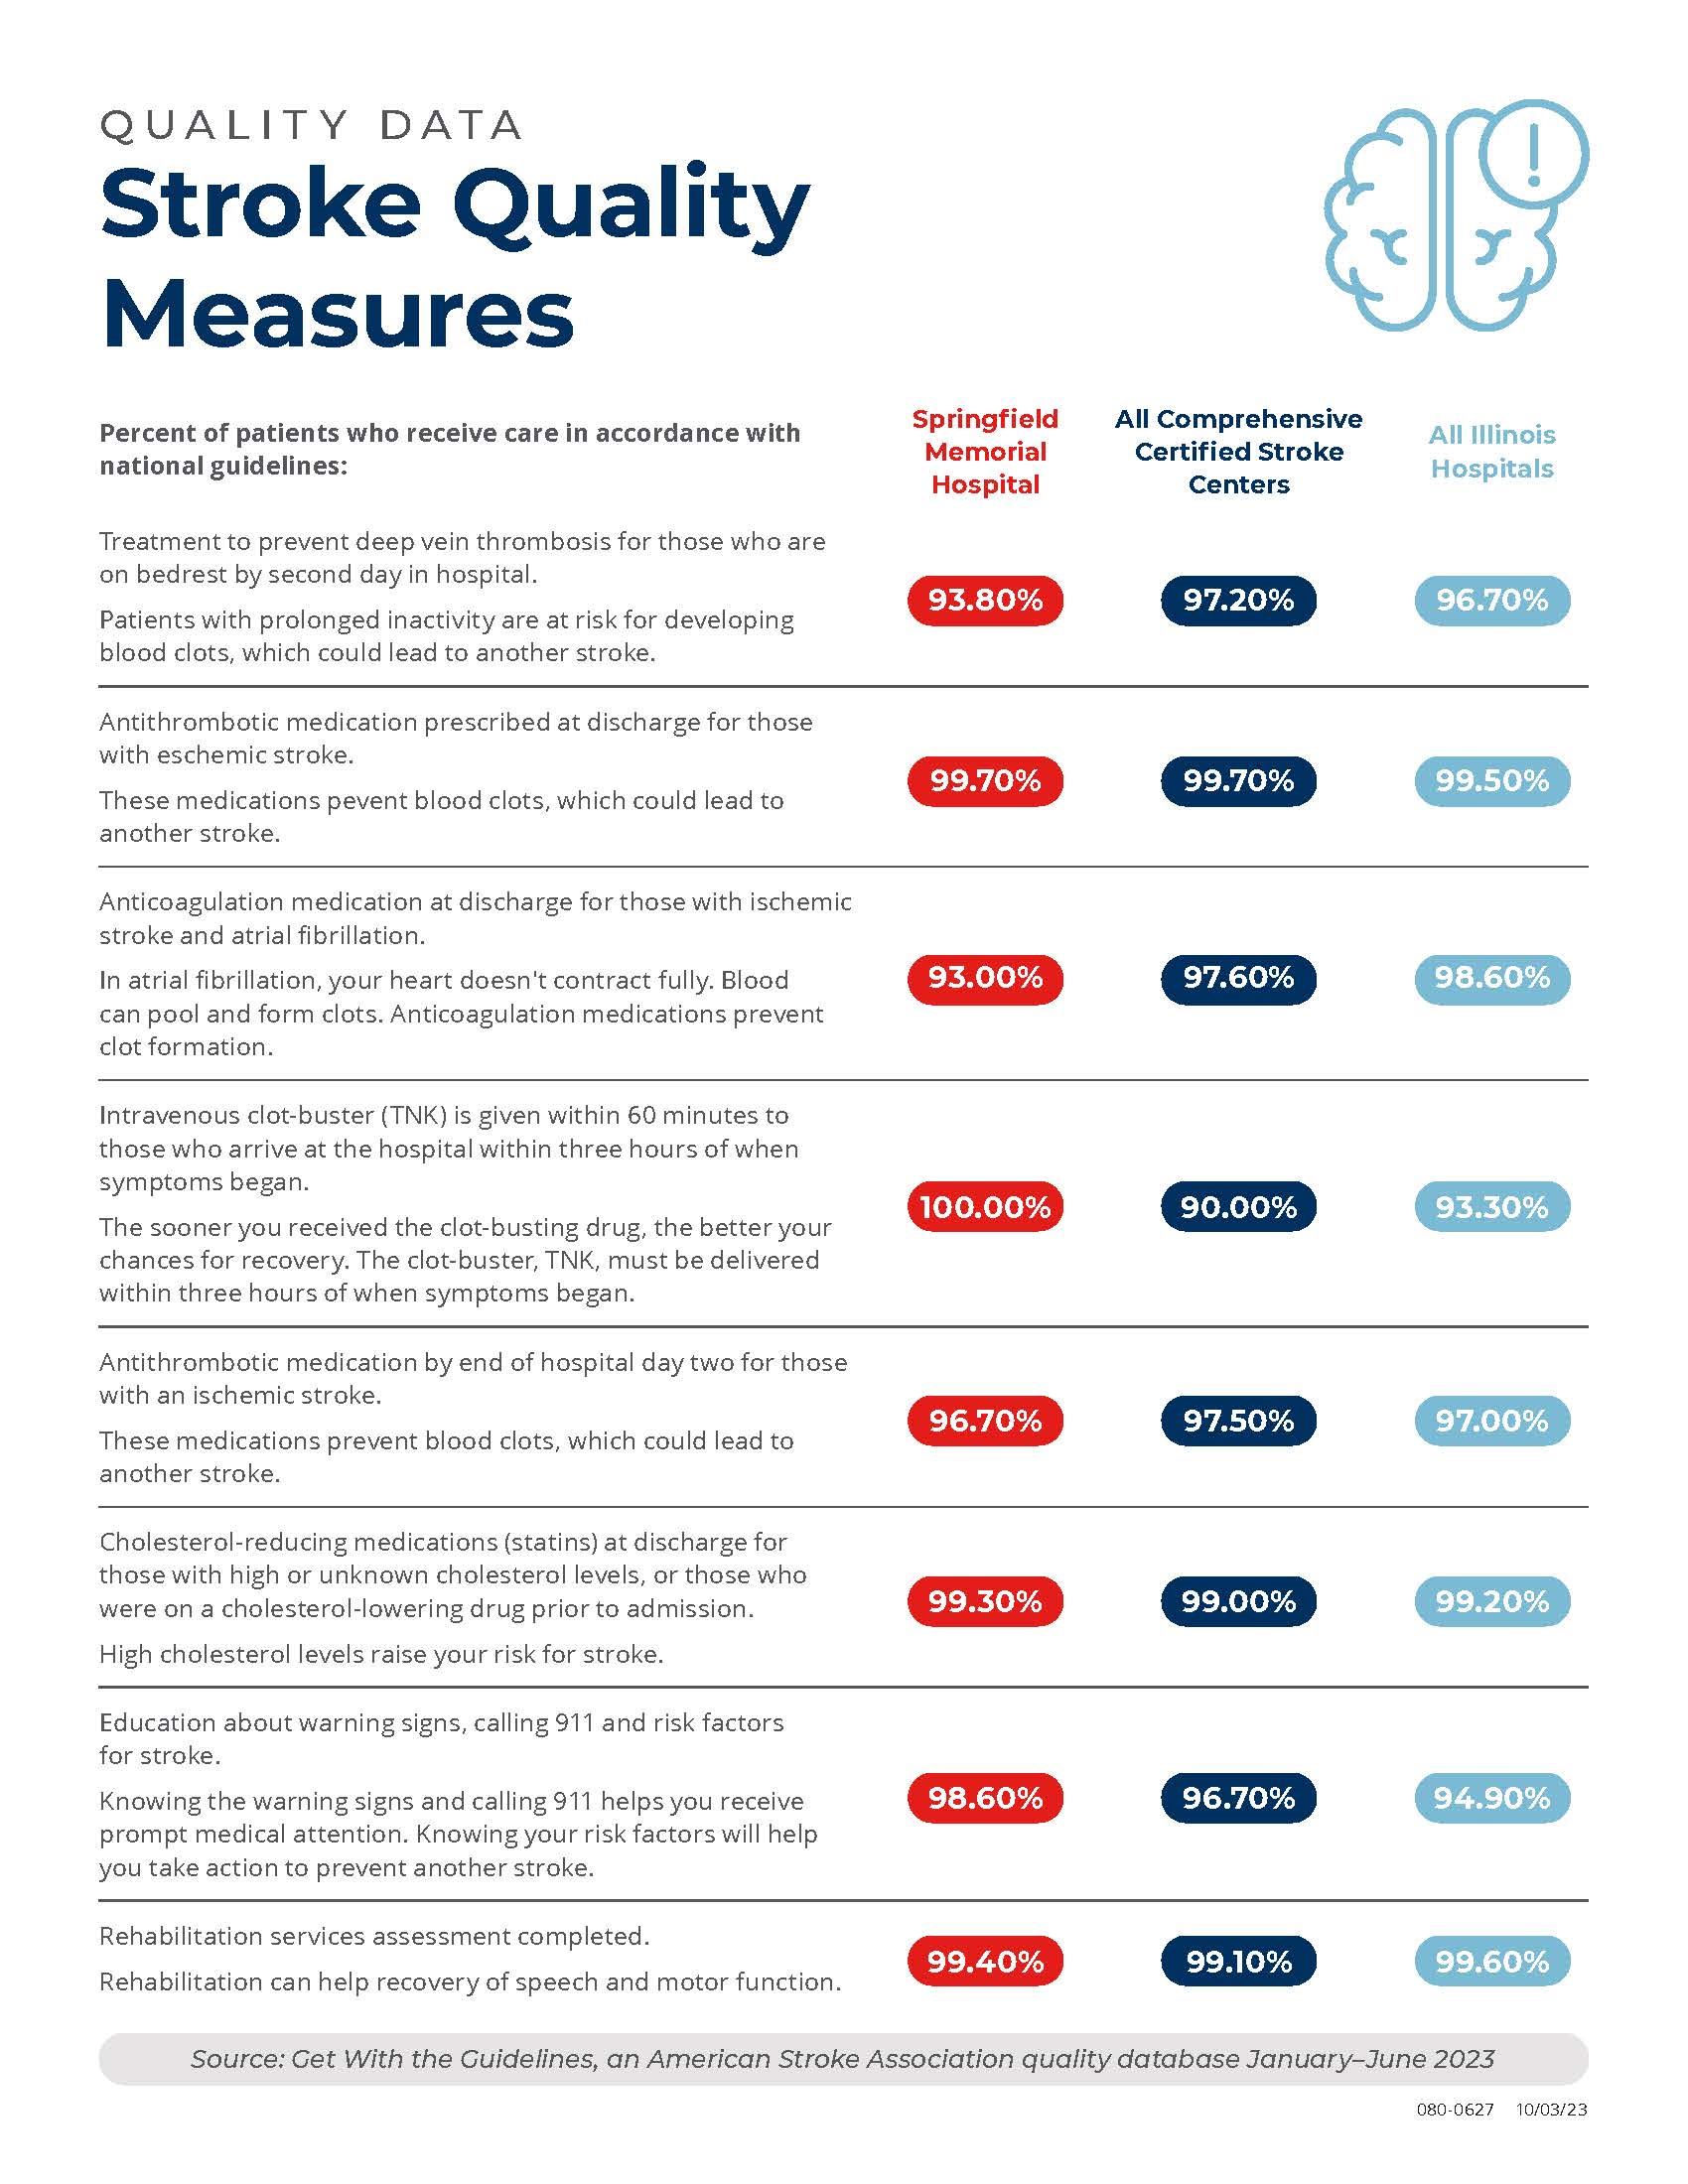 An infographic comparing Springfield Memorial Hospitals Stroke Quality Measures with all comprehensive certified stroke centers and all Illinois hospitals.